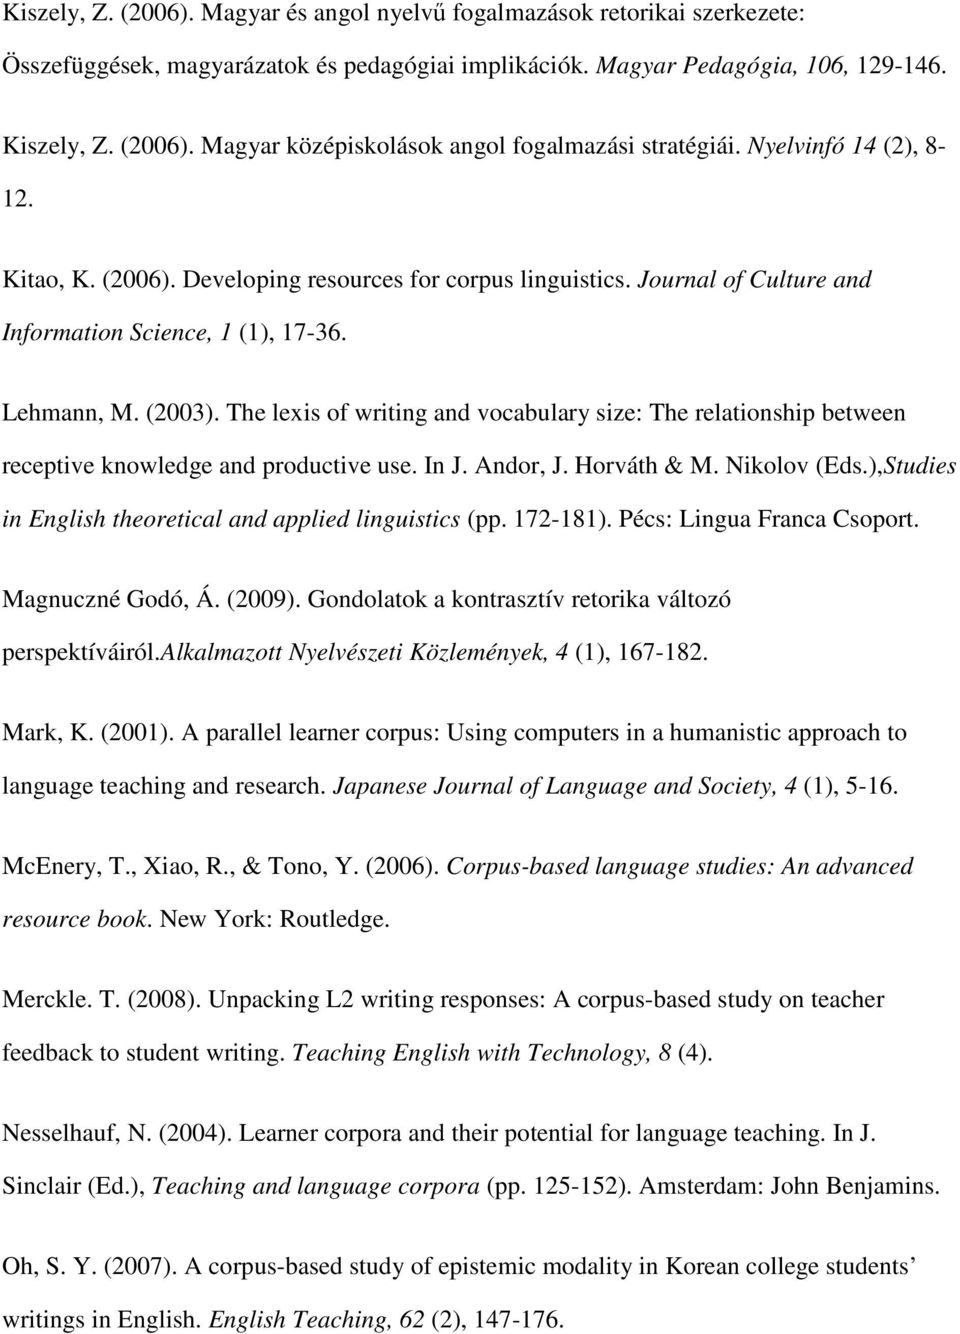 The lexis of writing and vocabulary size: The relationship between receptive knowledge and productive use. In J. Andor, J. Horváth & M. Nikolov (Eds.